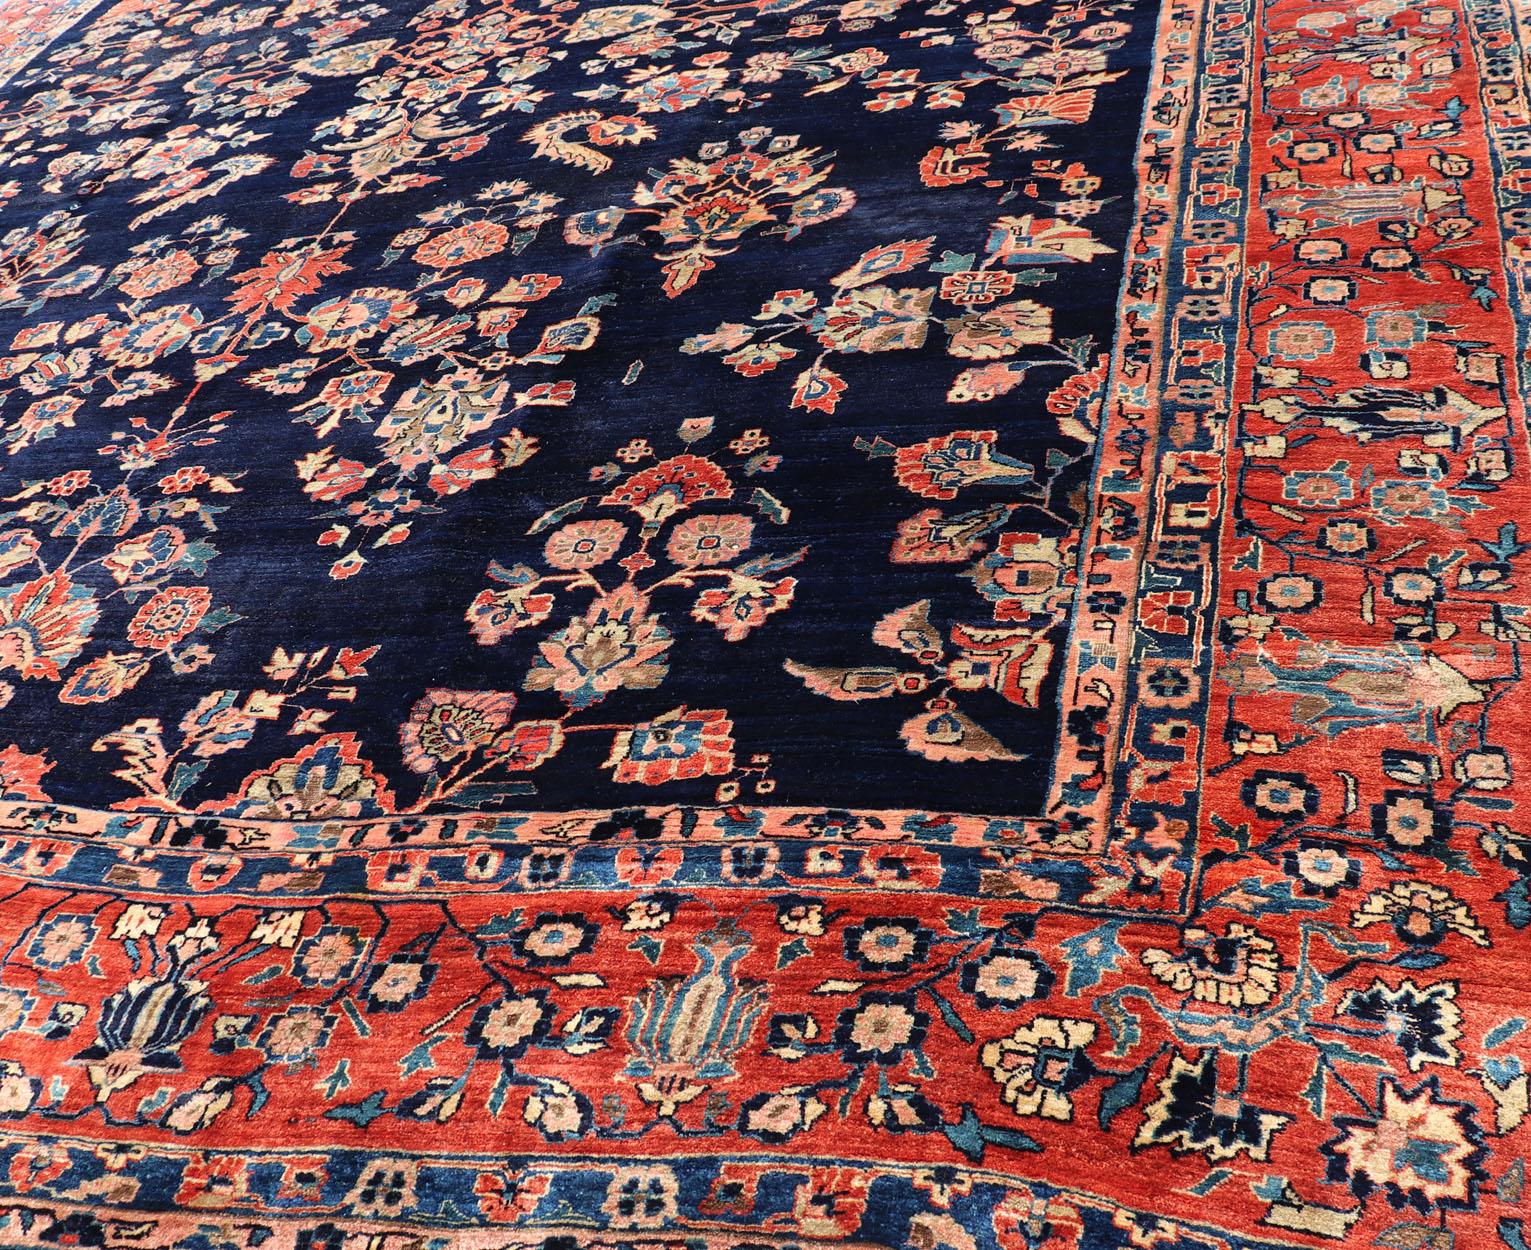 Wool Antique Large Sarouk Faraghan Rug with Floral Pattern in Navy and Orange-Red For Sale